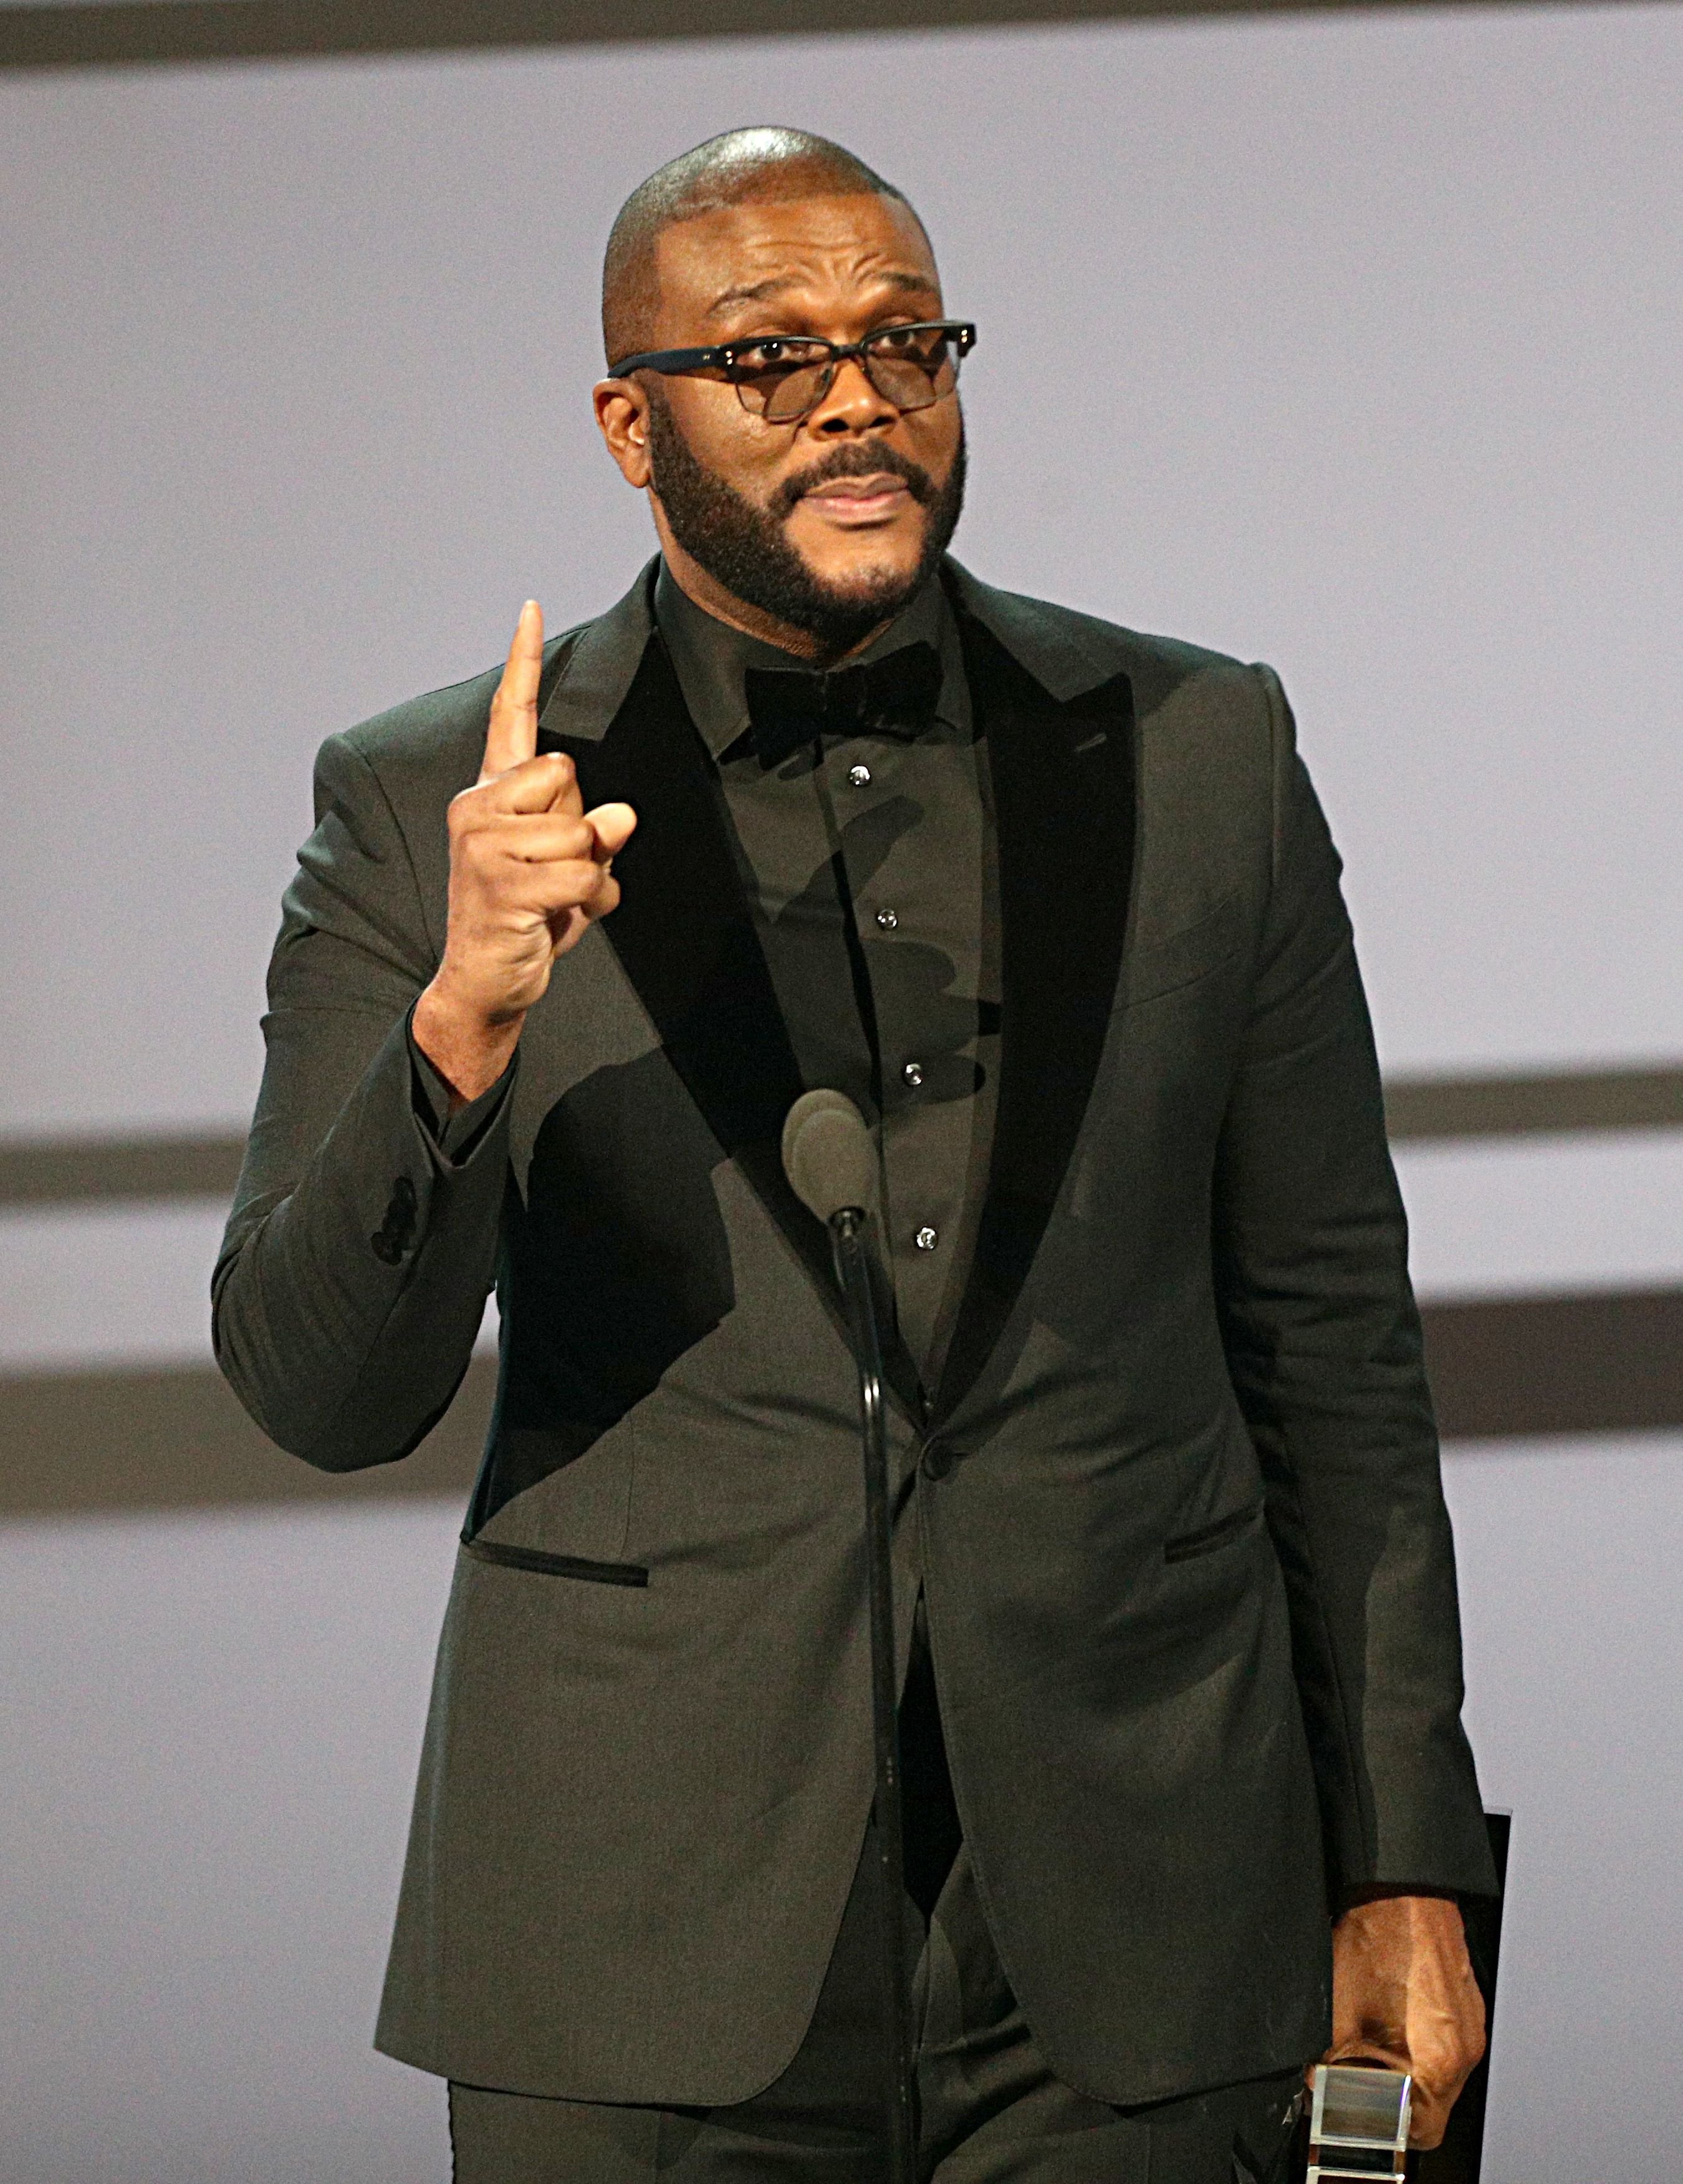  Tyler Perry accepts the Ultimate Icon Award onstage at the 2019 BET Awards at Microsoft Theater on June 23, 2019 in Los Angeles, California. | Source: Getty Images